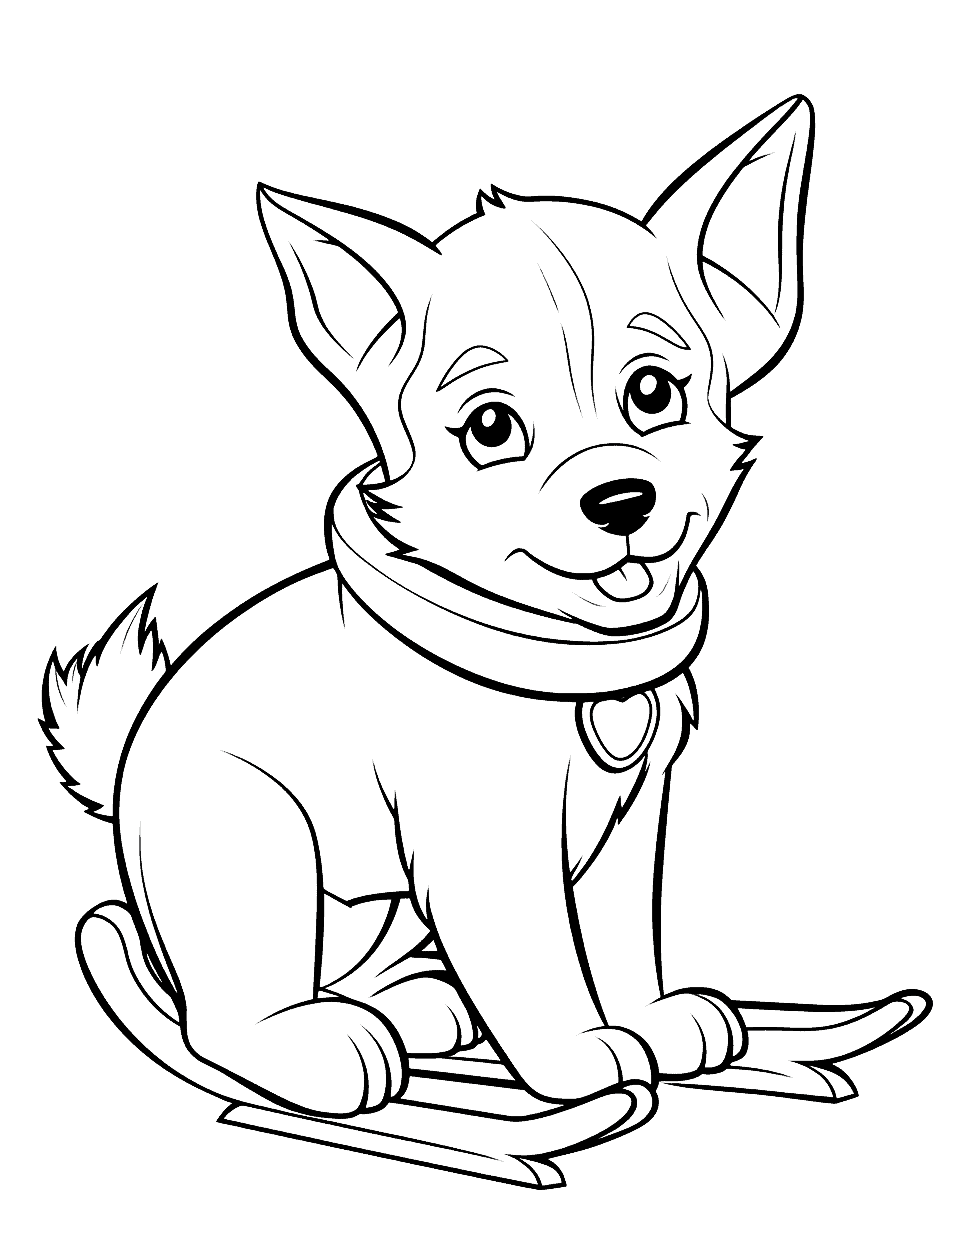 Winter Theme Husky on a Sled Puppy Coloring Page - A Husky puppy sitting on a sled in the middle of a snowy landscape.